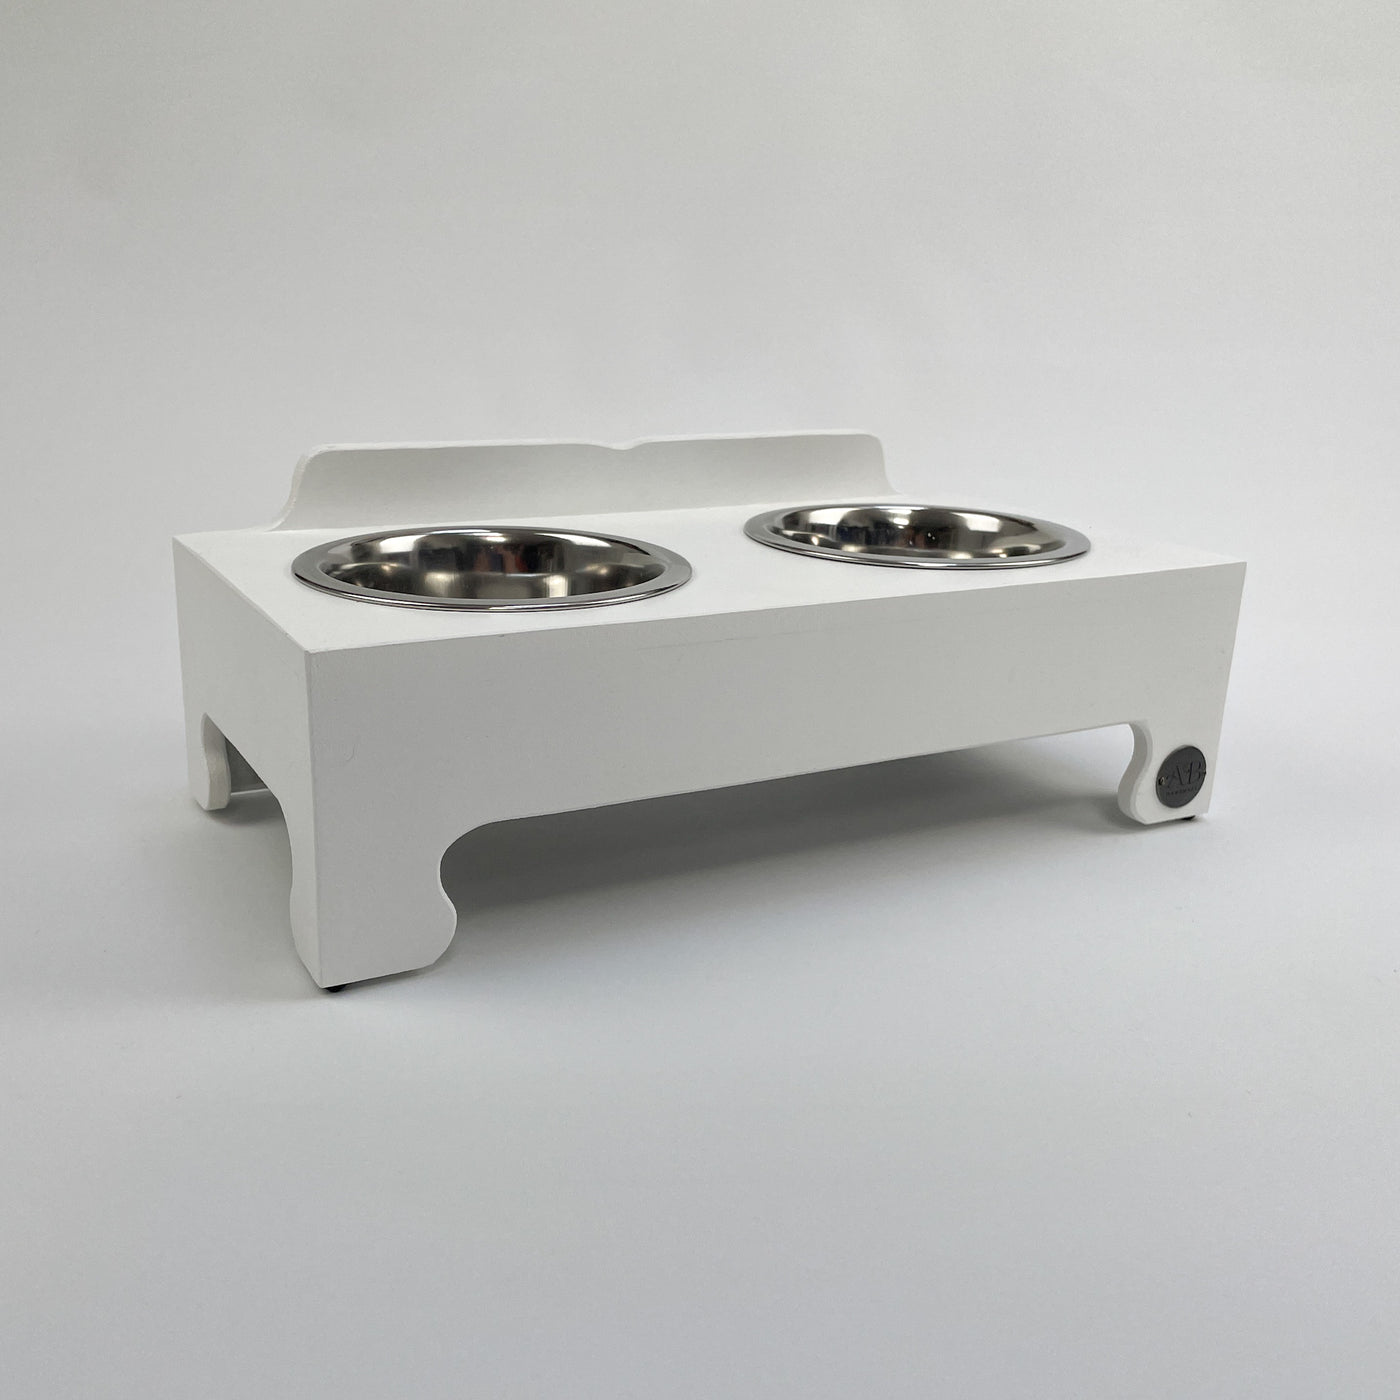 Small raised dog bowl feeding stand in white with stainless steel food dishes.